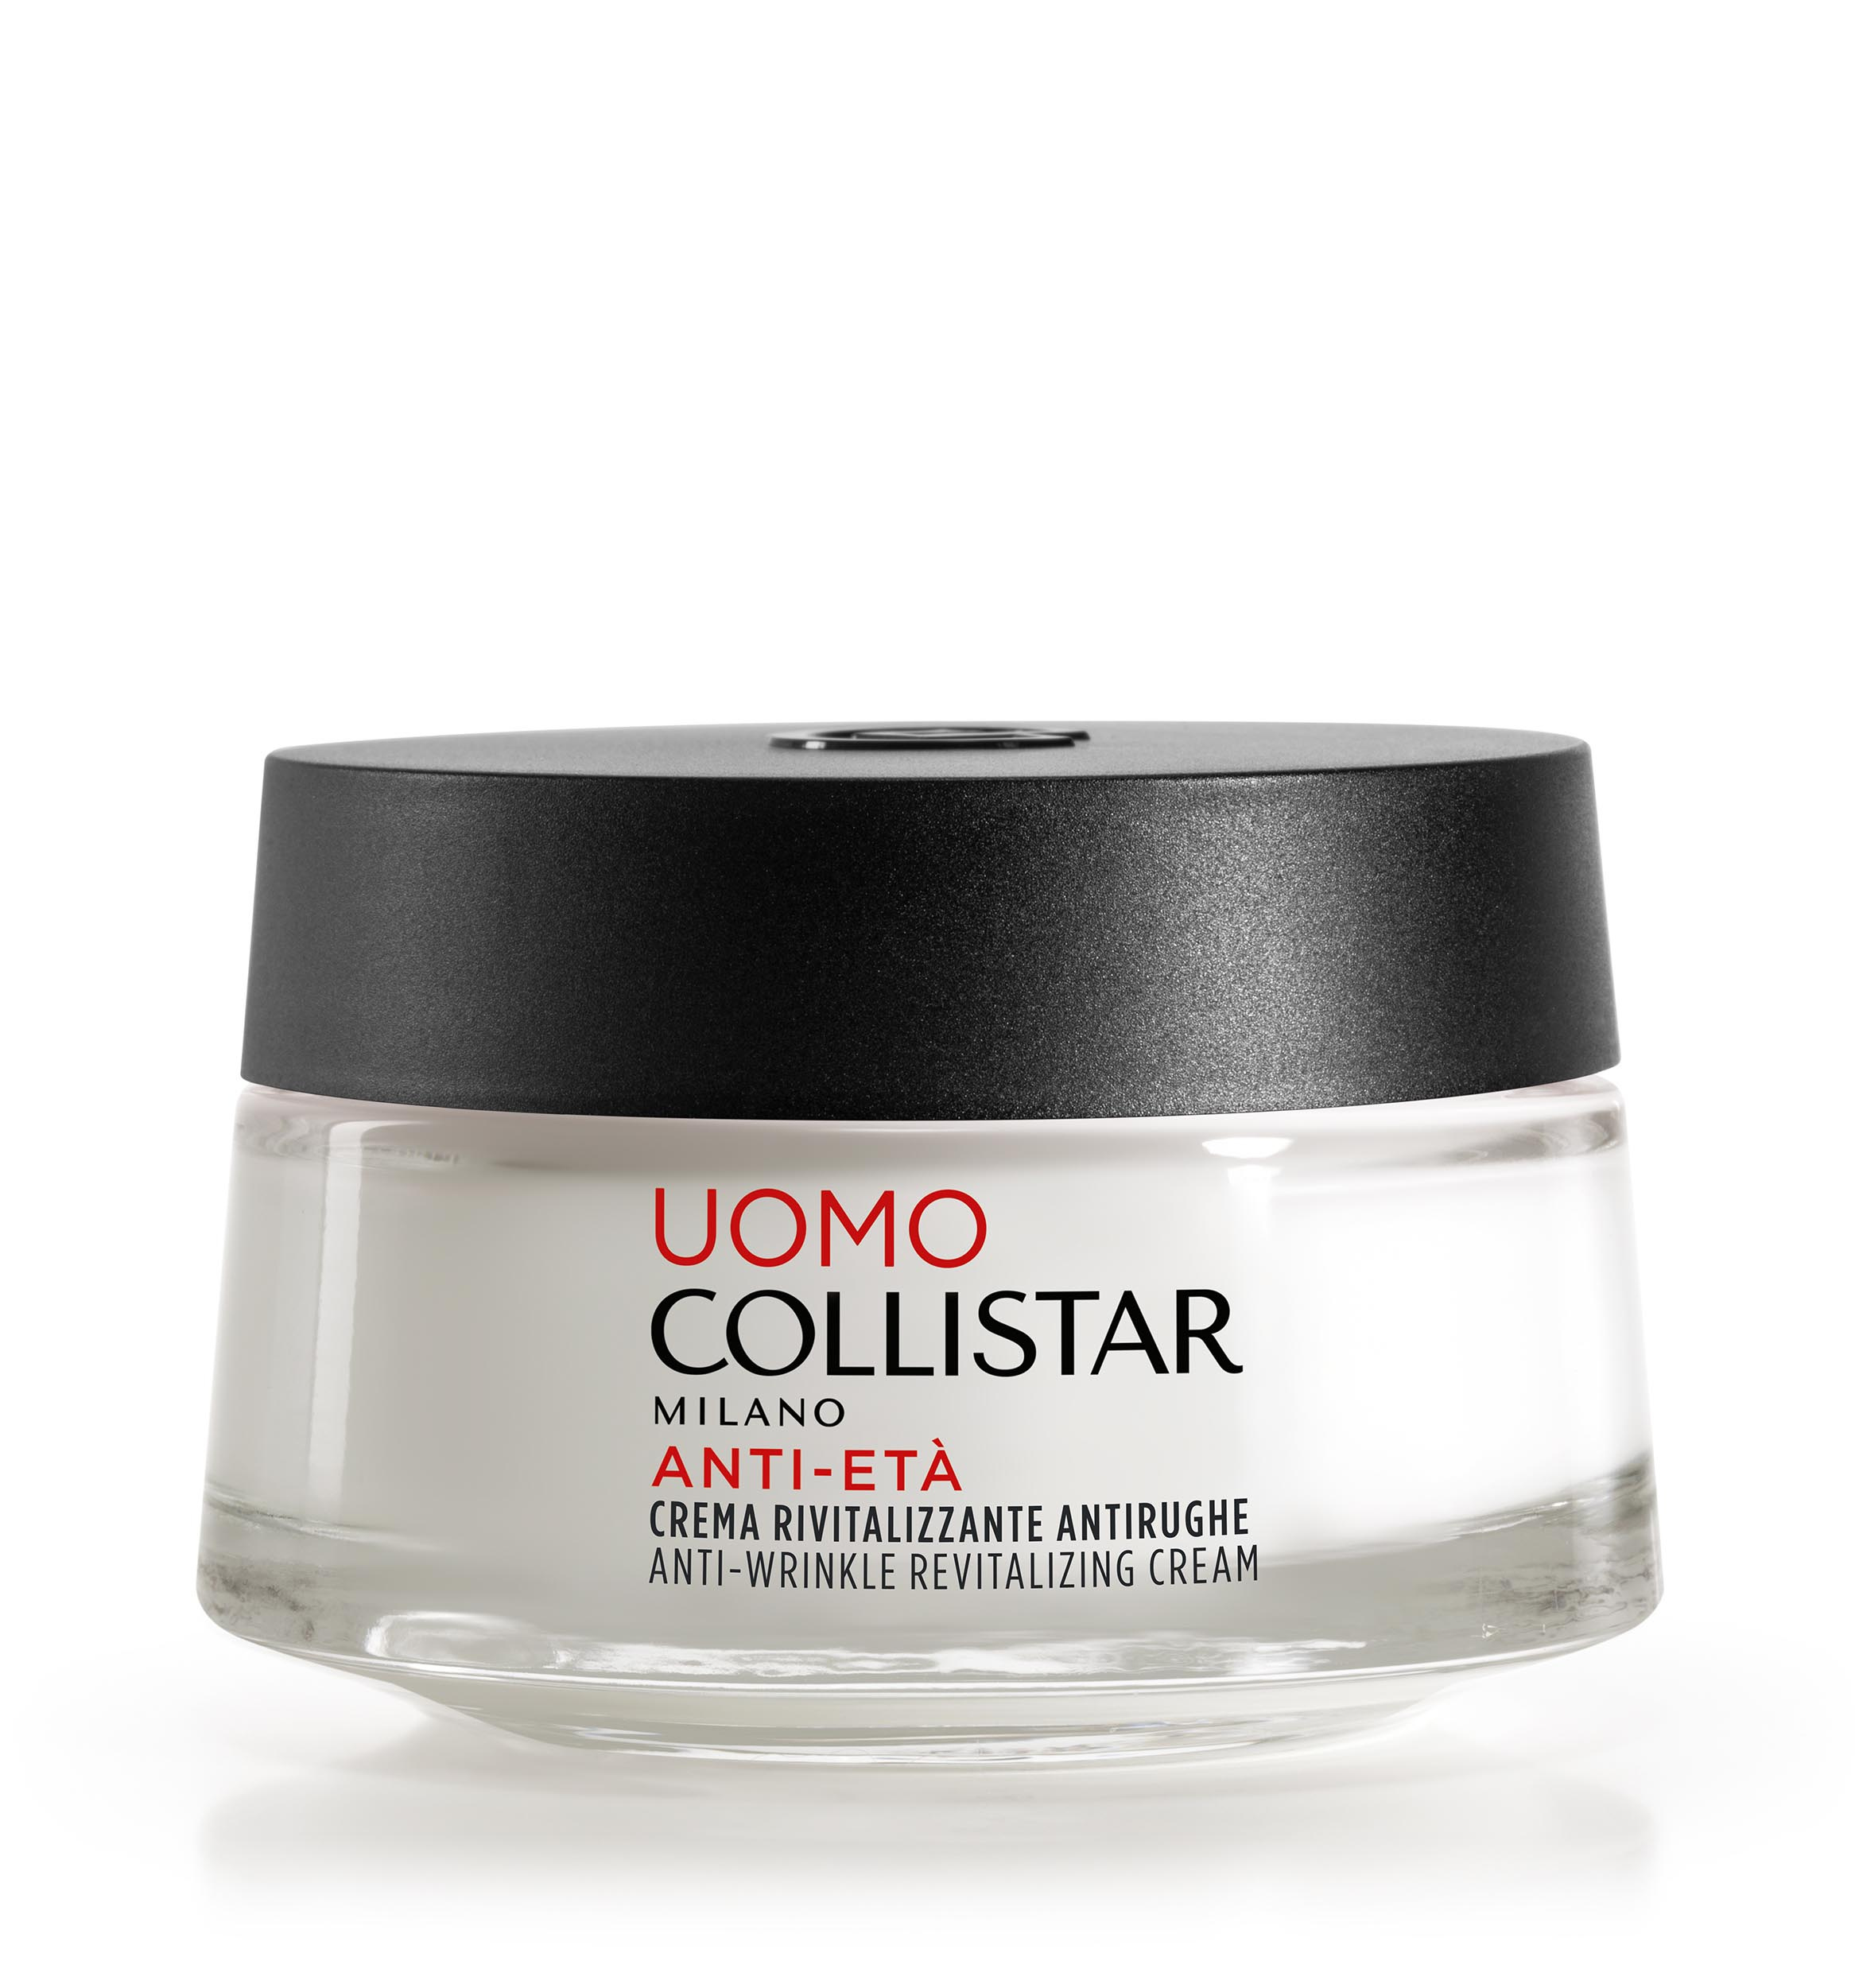 ANTI-WRINKLE REVITALIZING CREAM - Combination and oily skin | Collistar - Shop Online Ufficiale